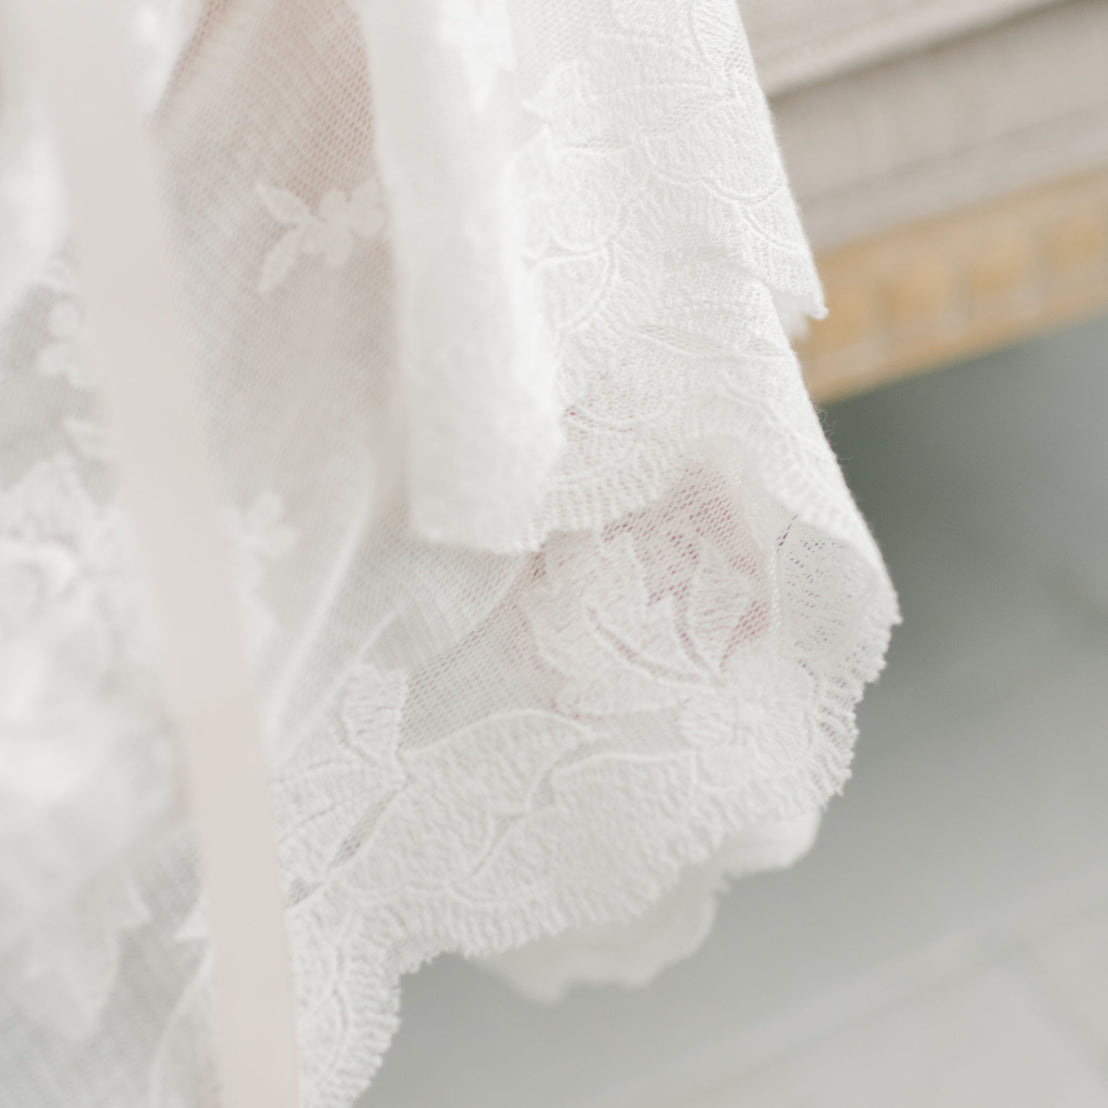 Close-up of delicate Charlotte Christening Gown & Bonnet lace fabric with intricate rose and vine embroidery draped gently over a surface, illuminated by soft natural light.